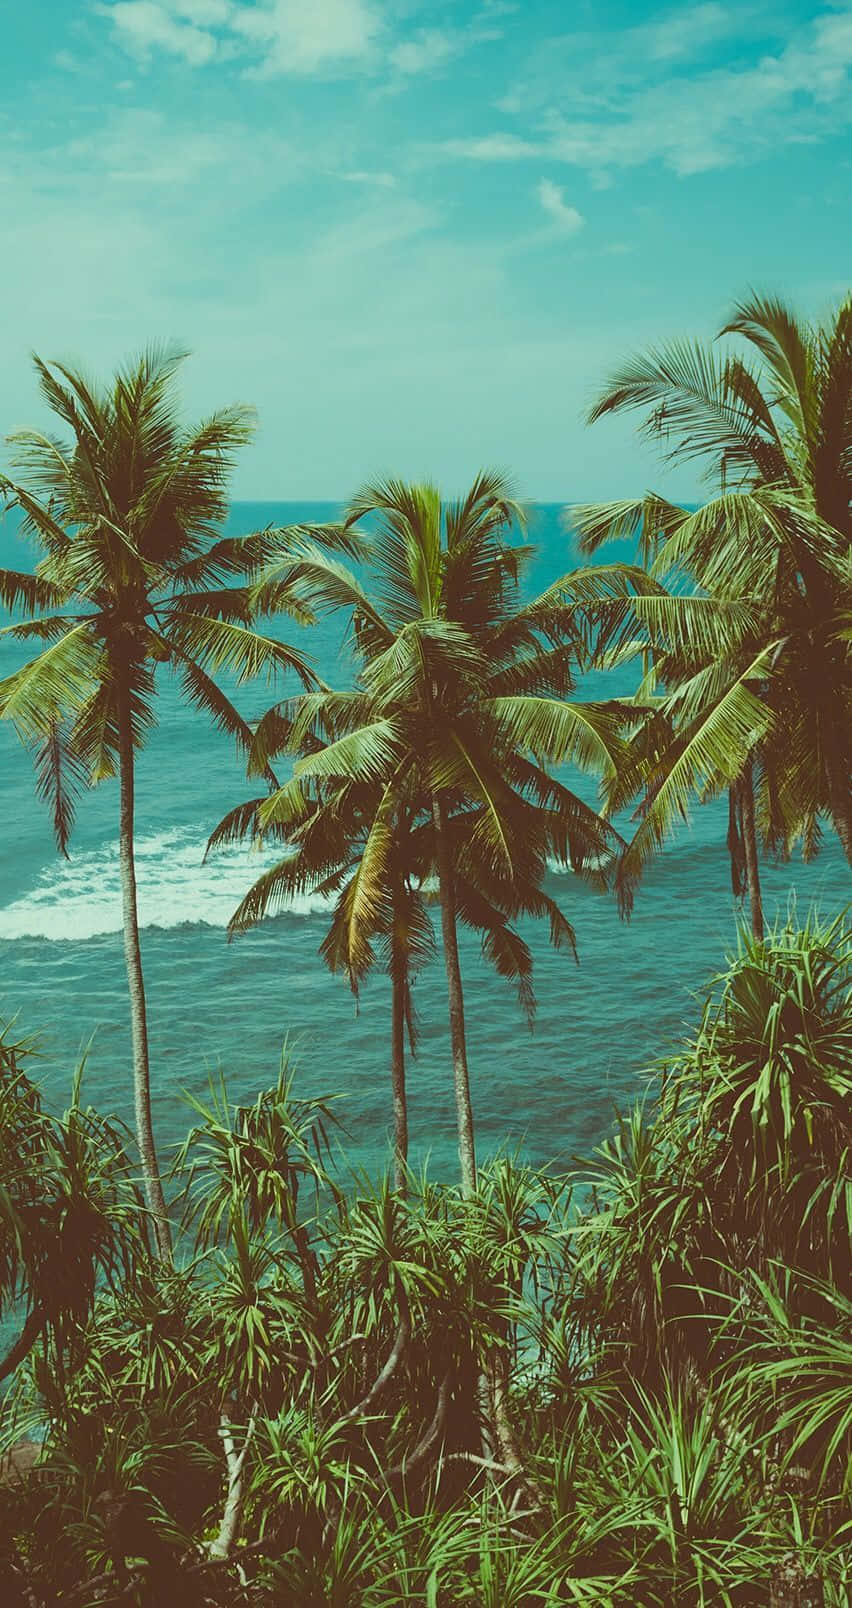 "A Perfect Paradise in Aesthetic Tropical." Wallpaper